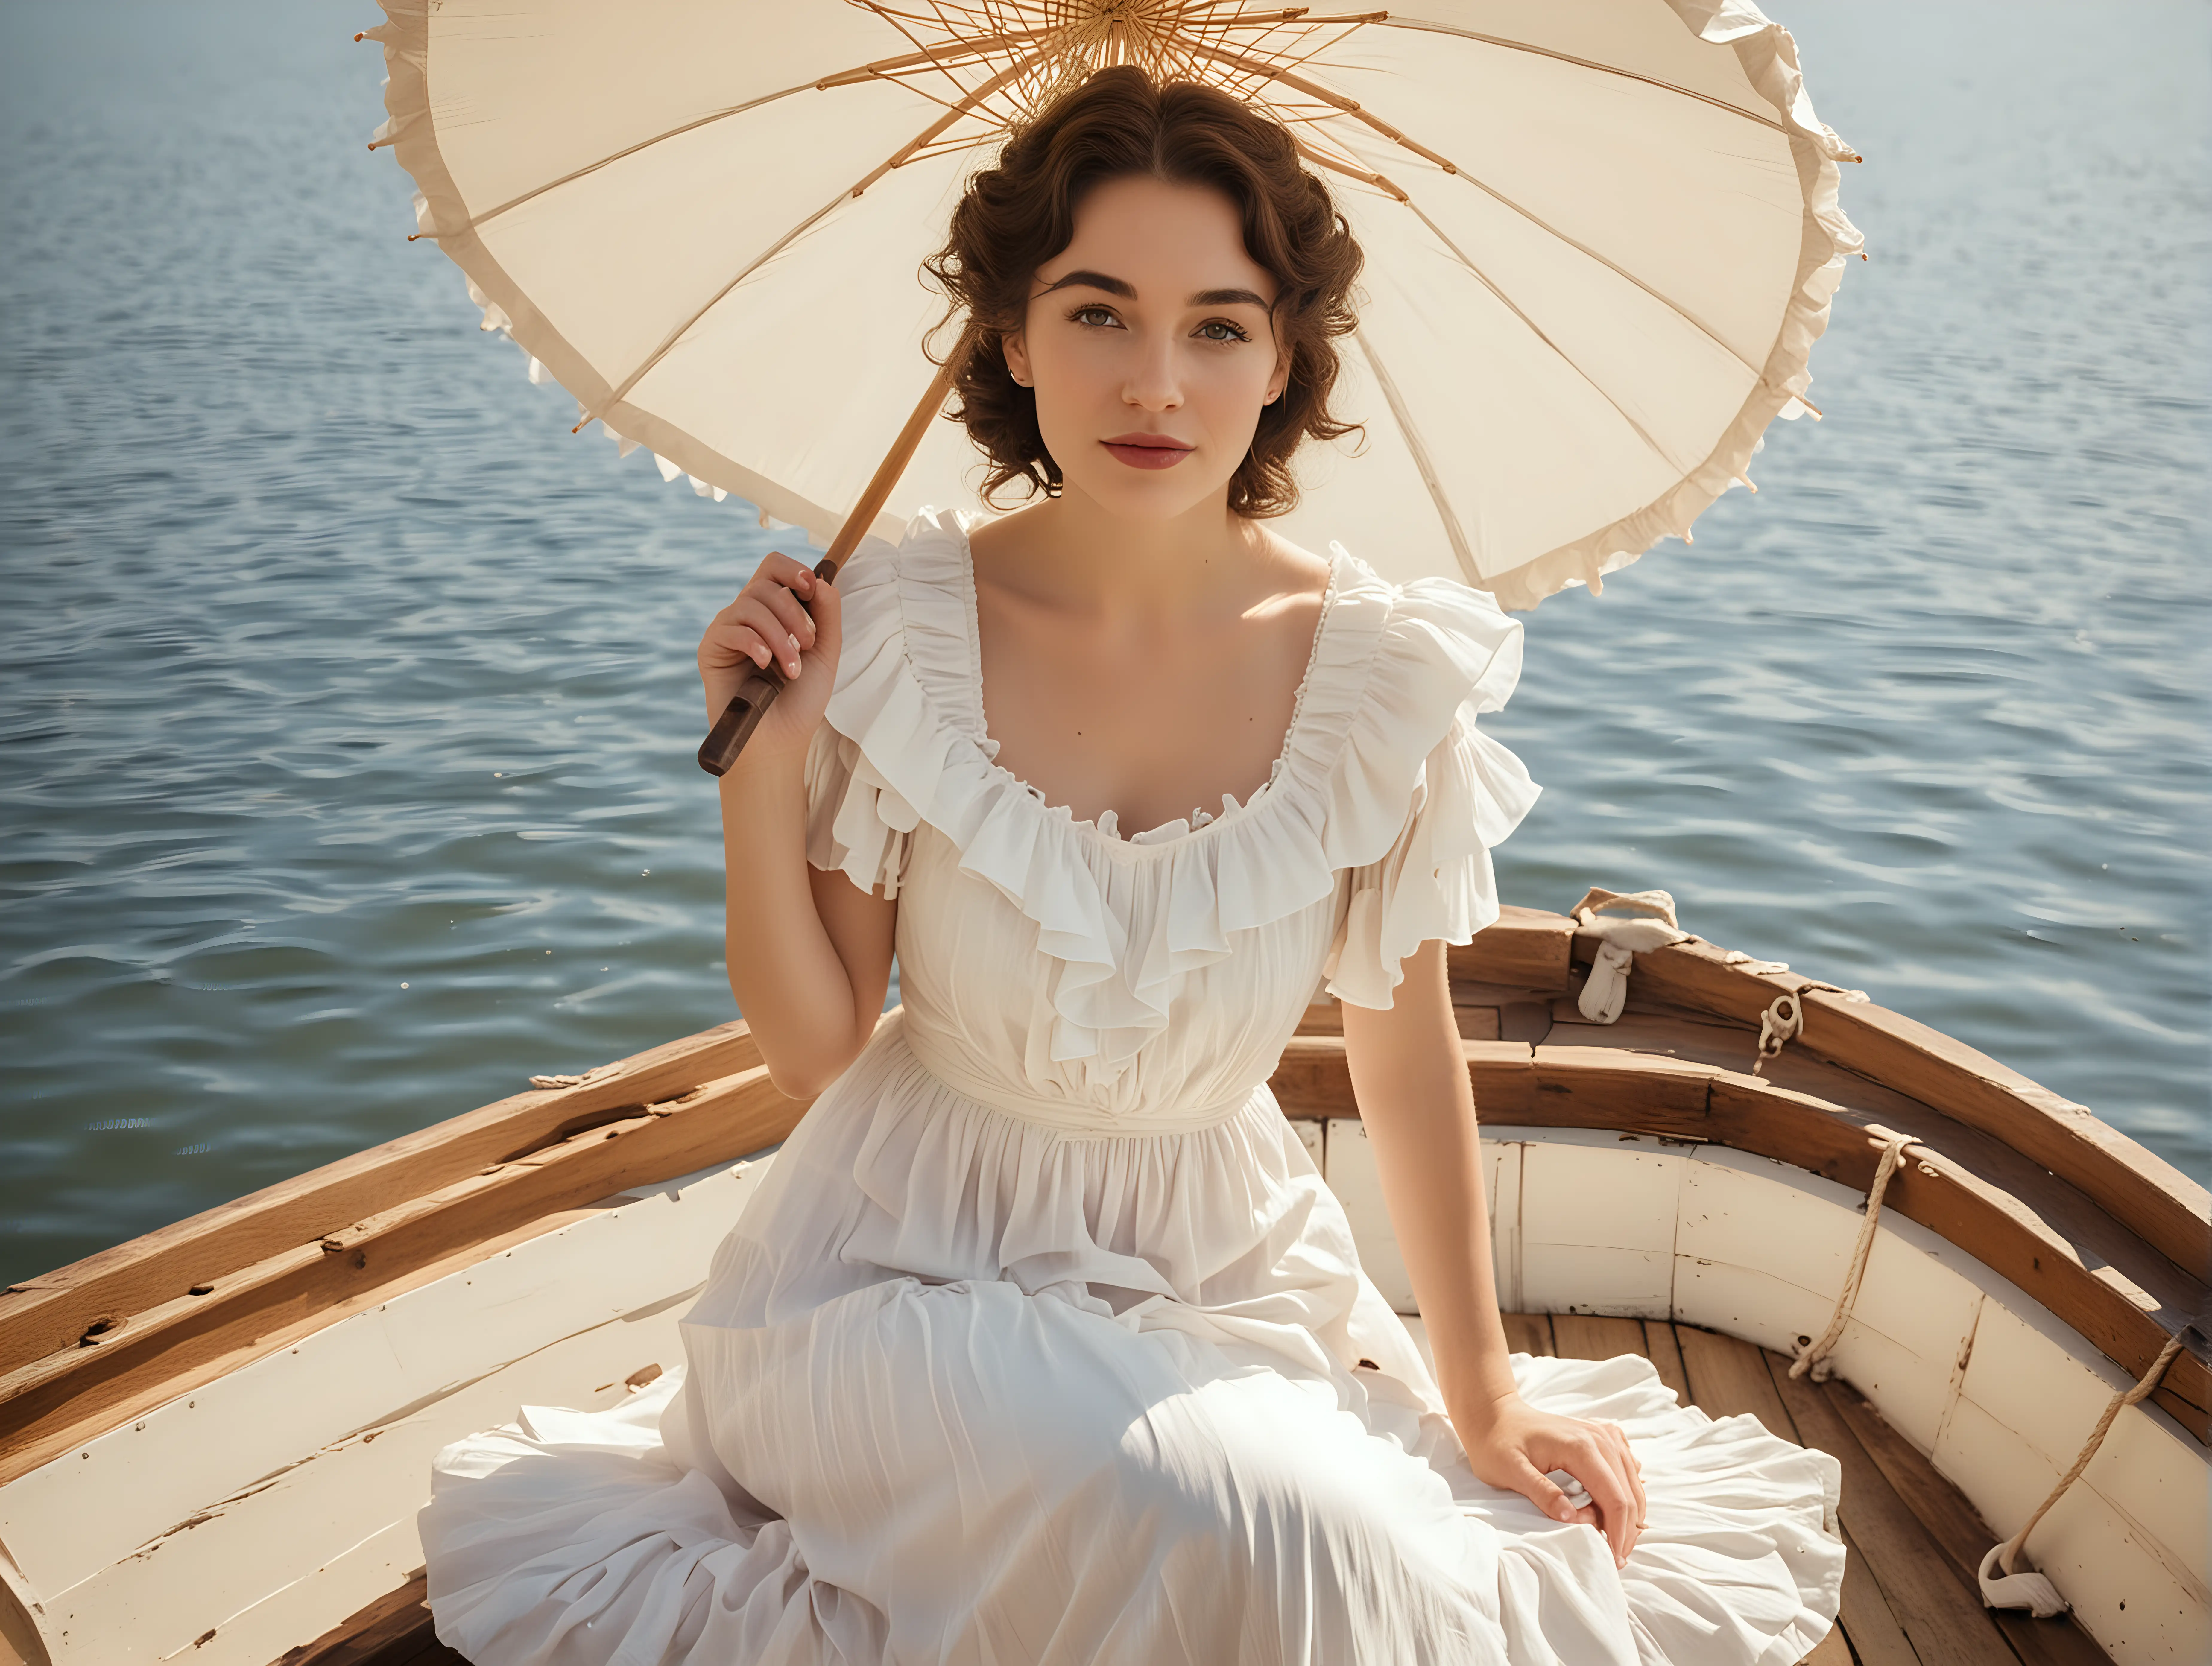 A WOMAN IN A WHITE DRESS WITH RUFFLES, HOLDING A PARASOL, SITTING IN A WOODEN BOAT, LOOKING STRAIGHT AT THE VIEWER,  1930'S STYLE, BRIGHT SUNNY DAY, NOT SMILING